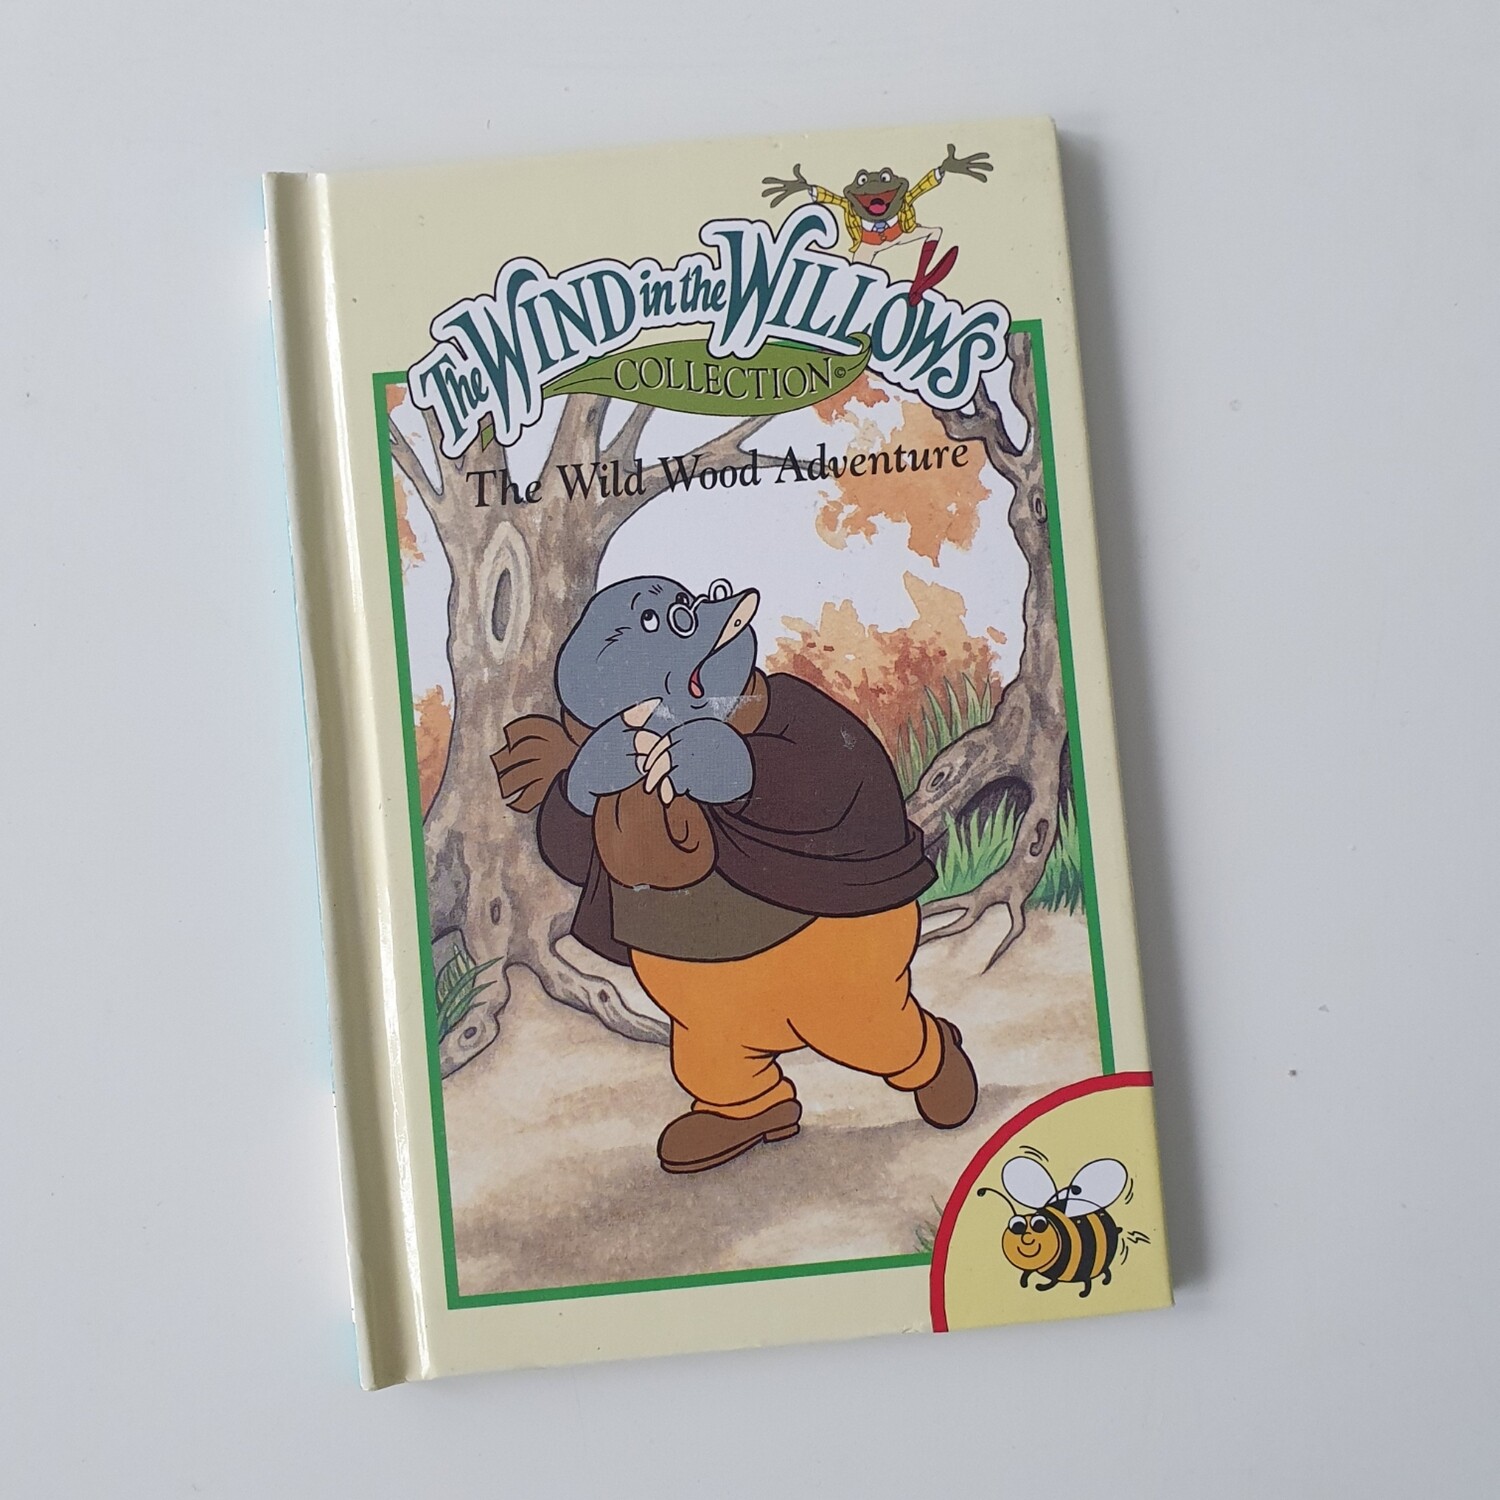 Wind in the Willows - Wild Wood Adventure, Mole